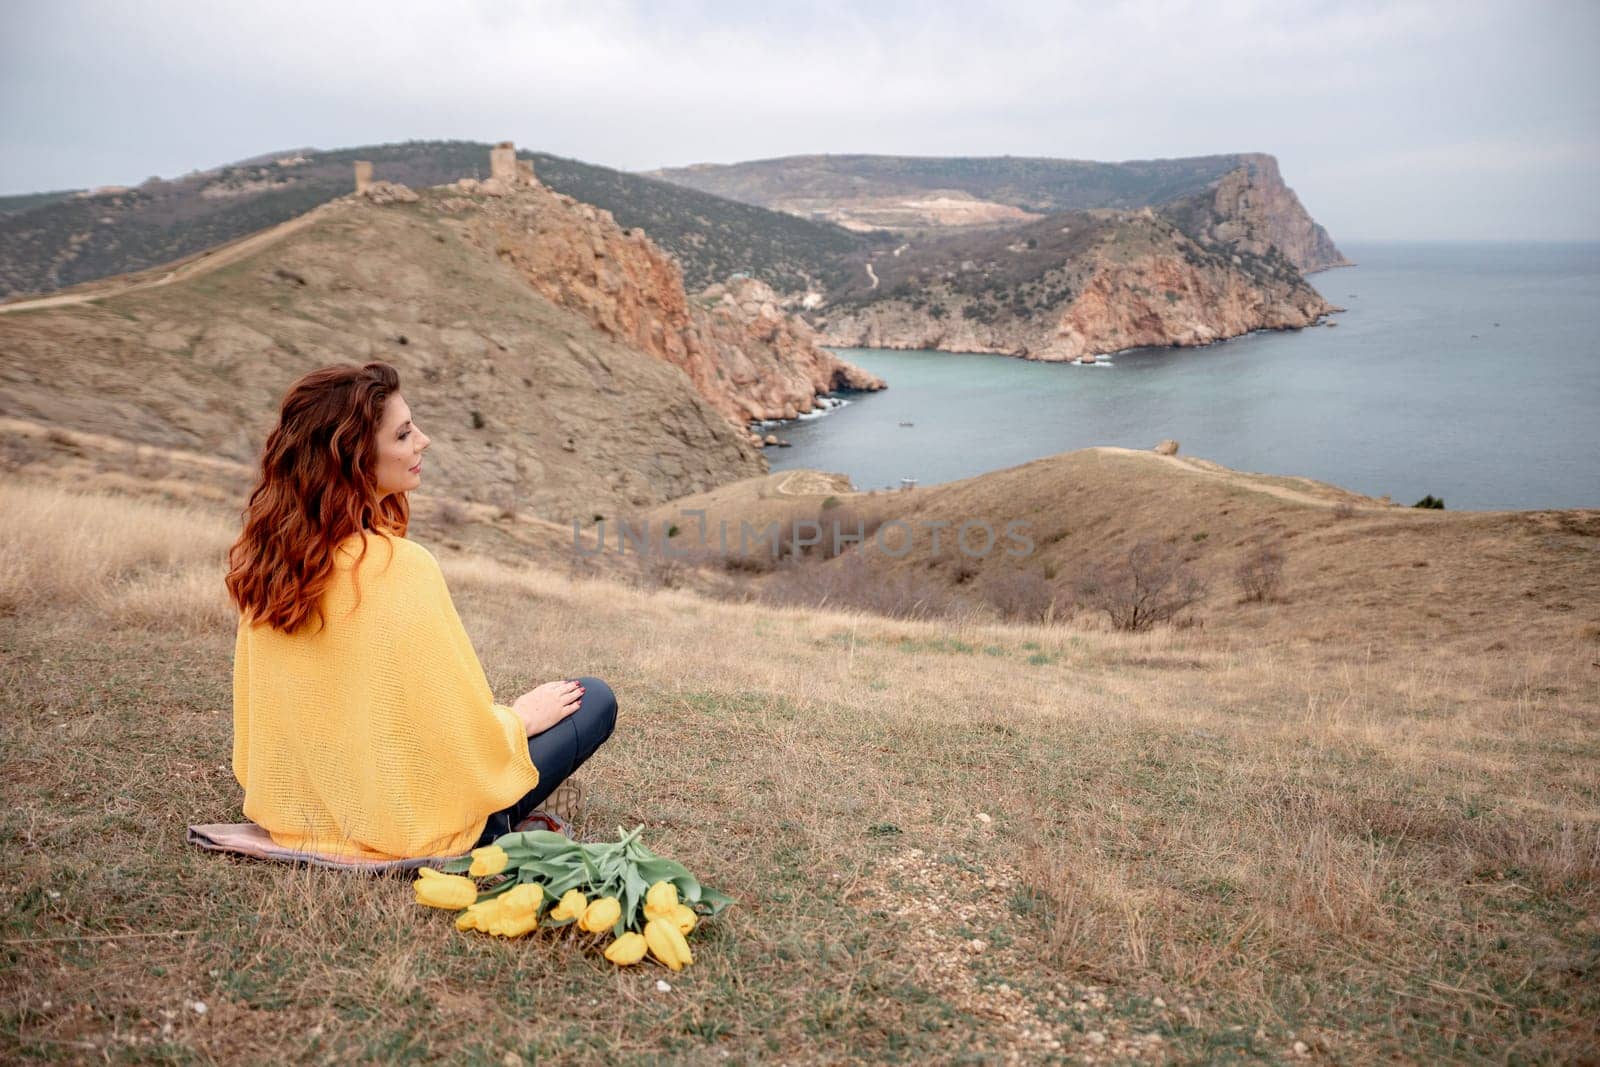 A woman sits on the grass with a bouquet of yellow flowers in her lap. She is looking out at the ocean, taking in the view. Concept of peace and tranquility